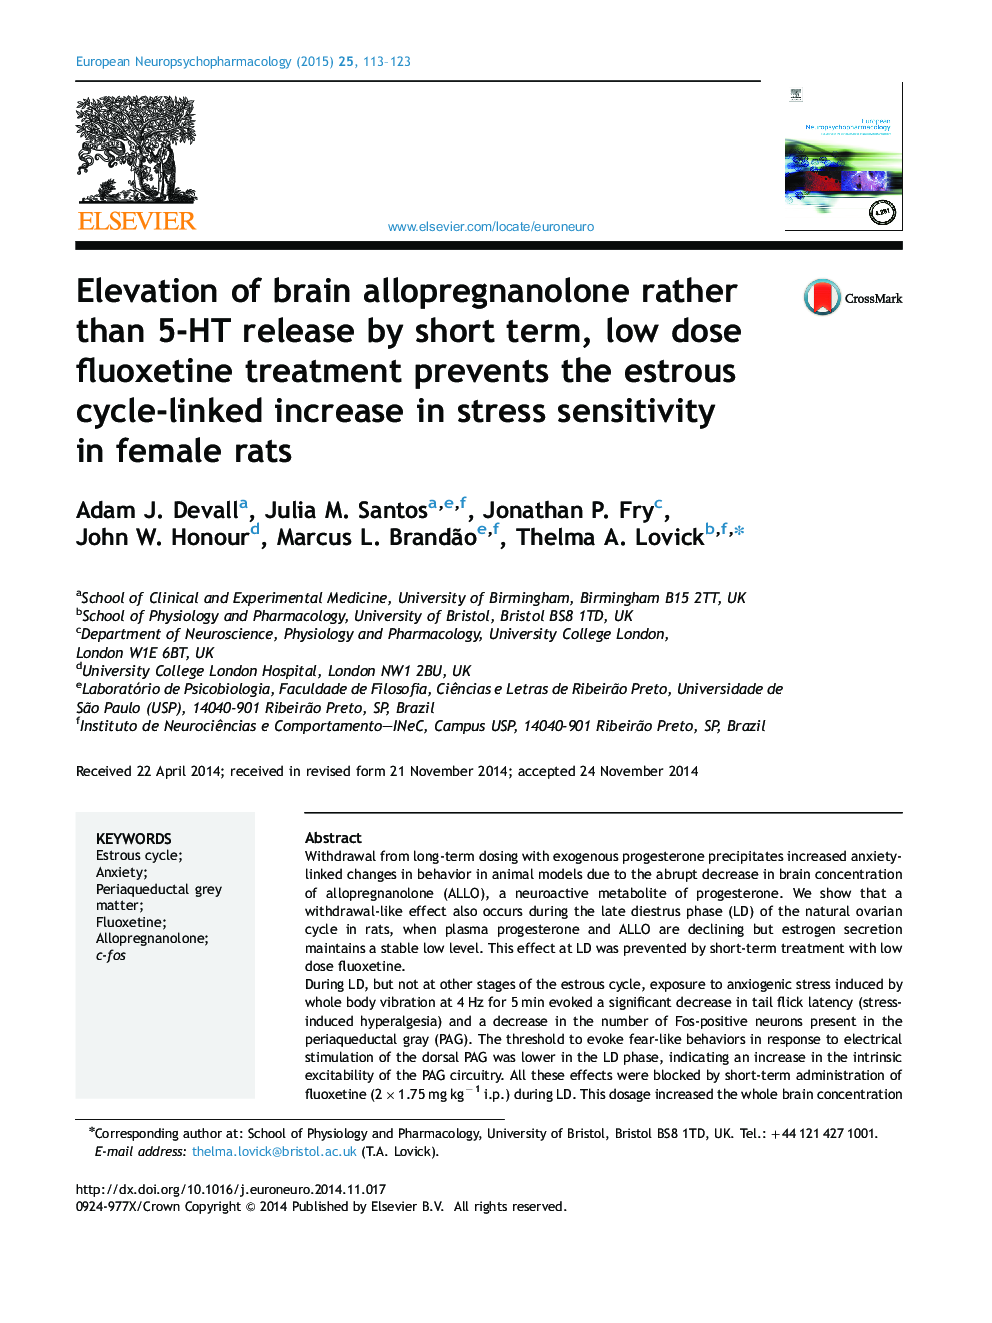 Elevation of brain allopregnanolone rather than 5-HT release by short term, low dose fluoxetine treatment prevents the estrous cycle-linked increase in stress sensitivity in female rats